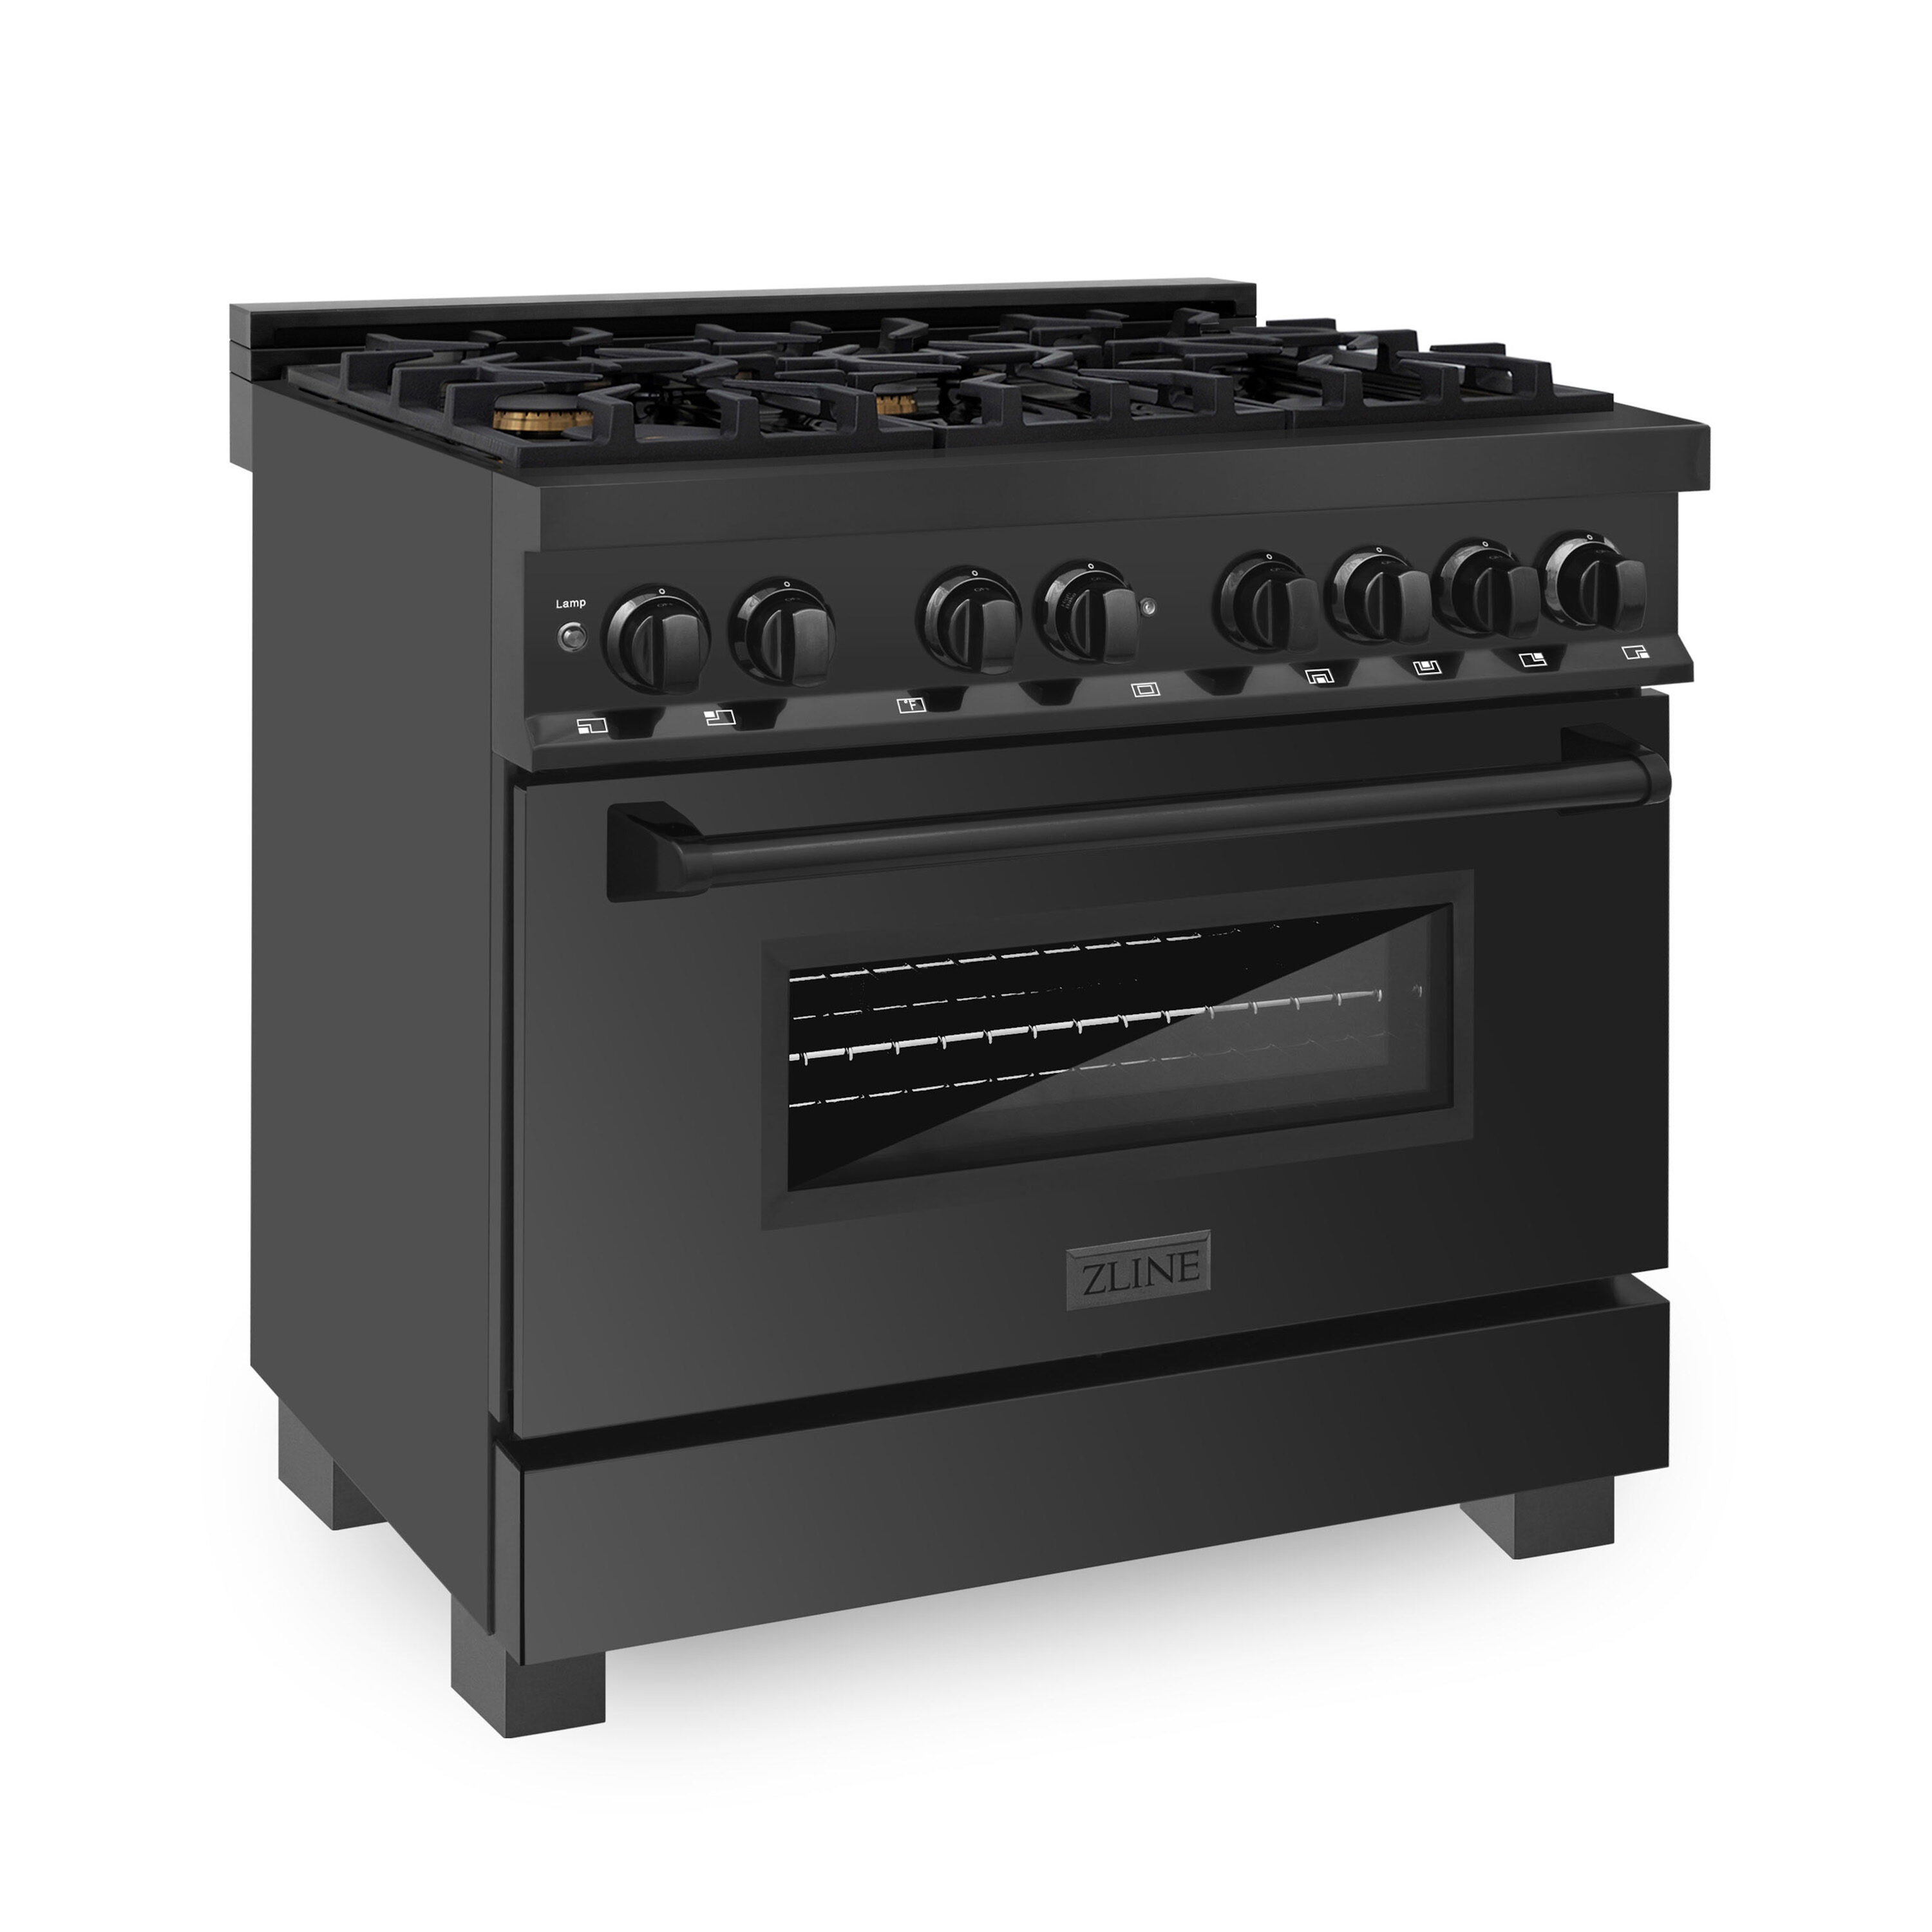 ZLINE 30 in. 4.2 Cu. ft. 4 Burner GAS Range with Convection GAS Oven in Stainless Steel (SGR30)